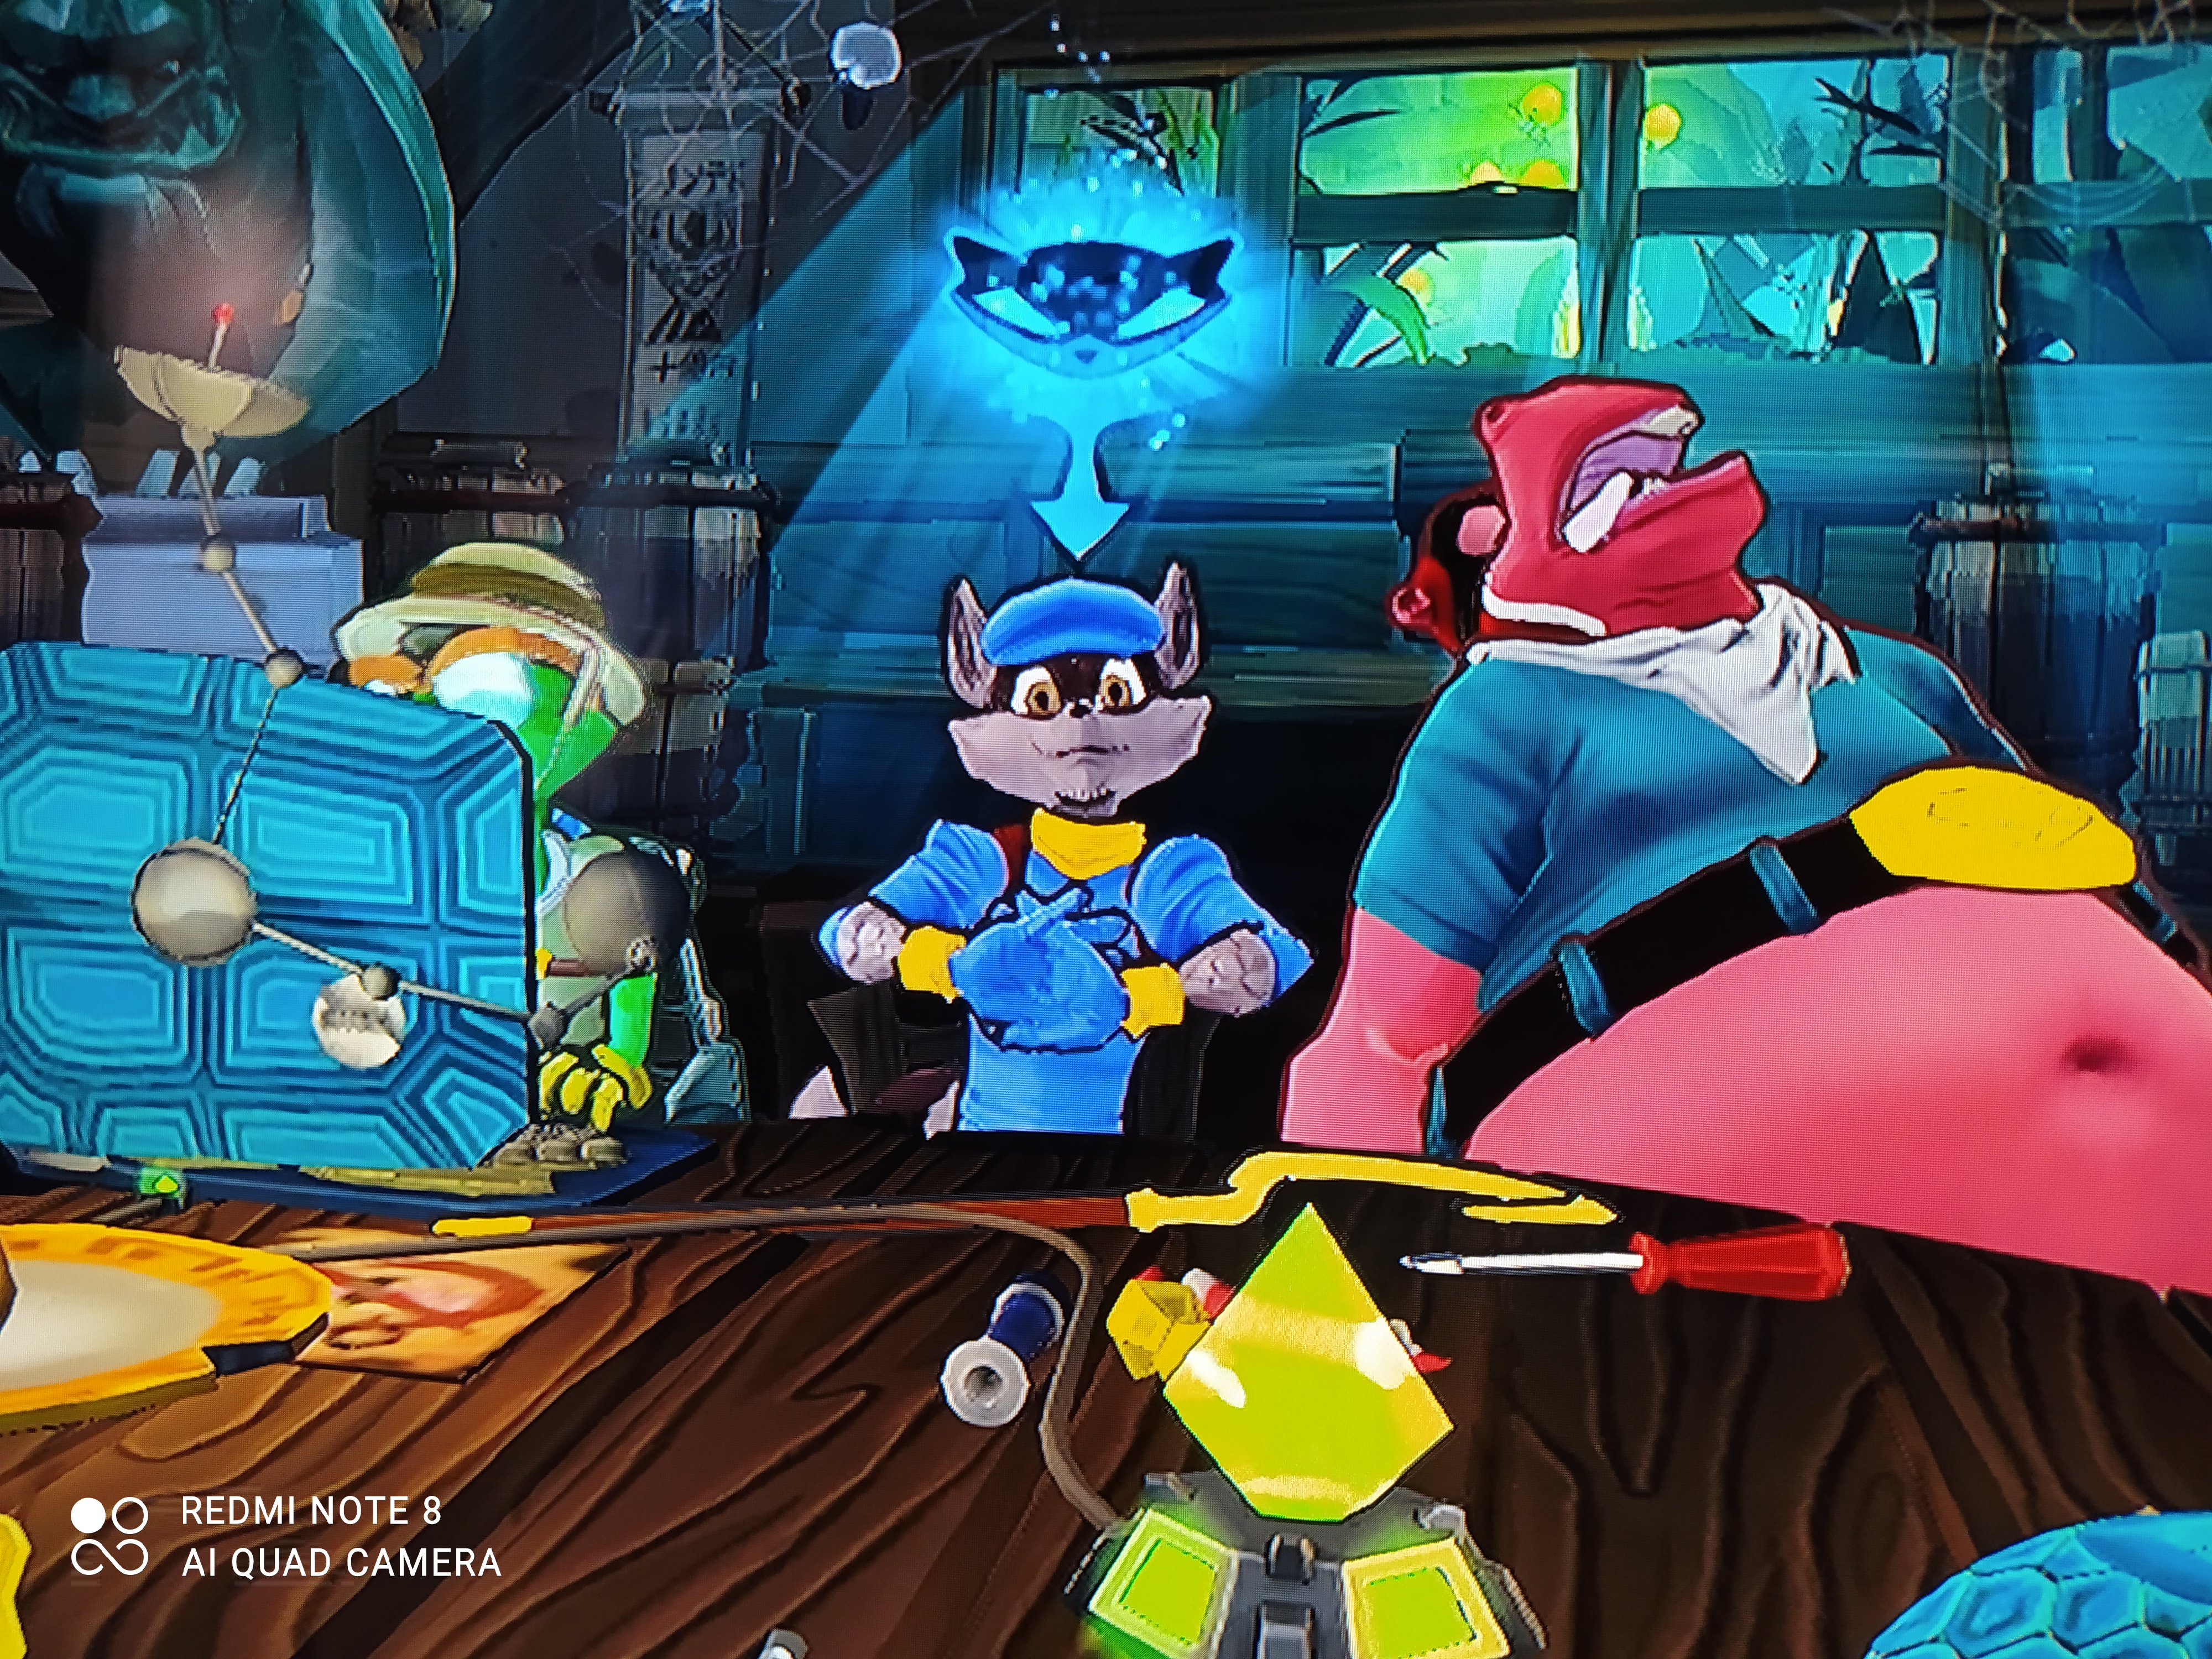 Sly Cooper: Thieves in Time for PS3